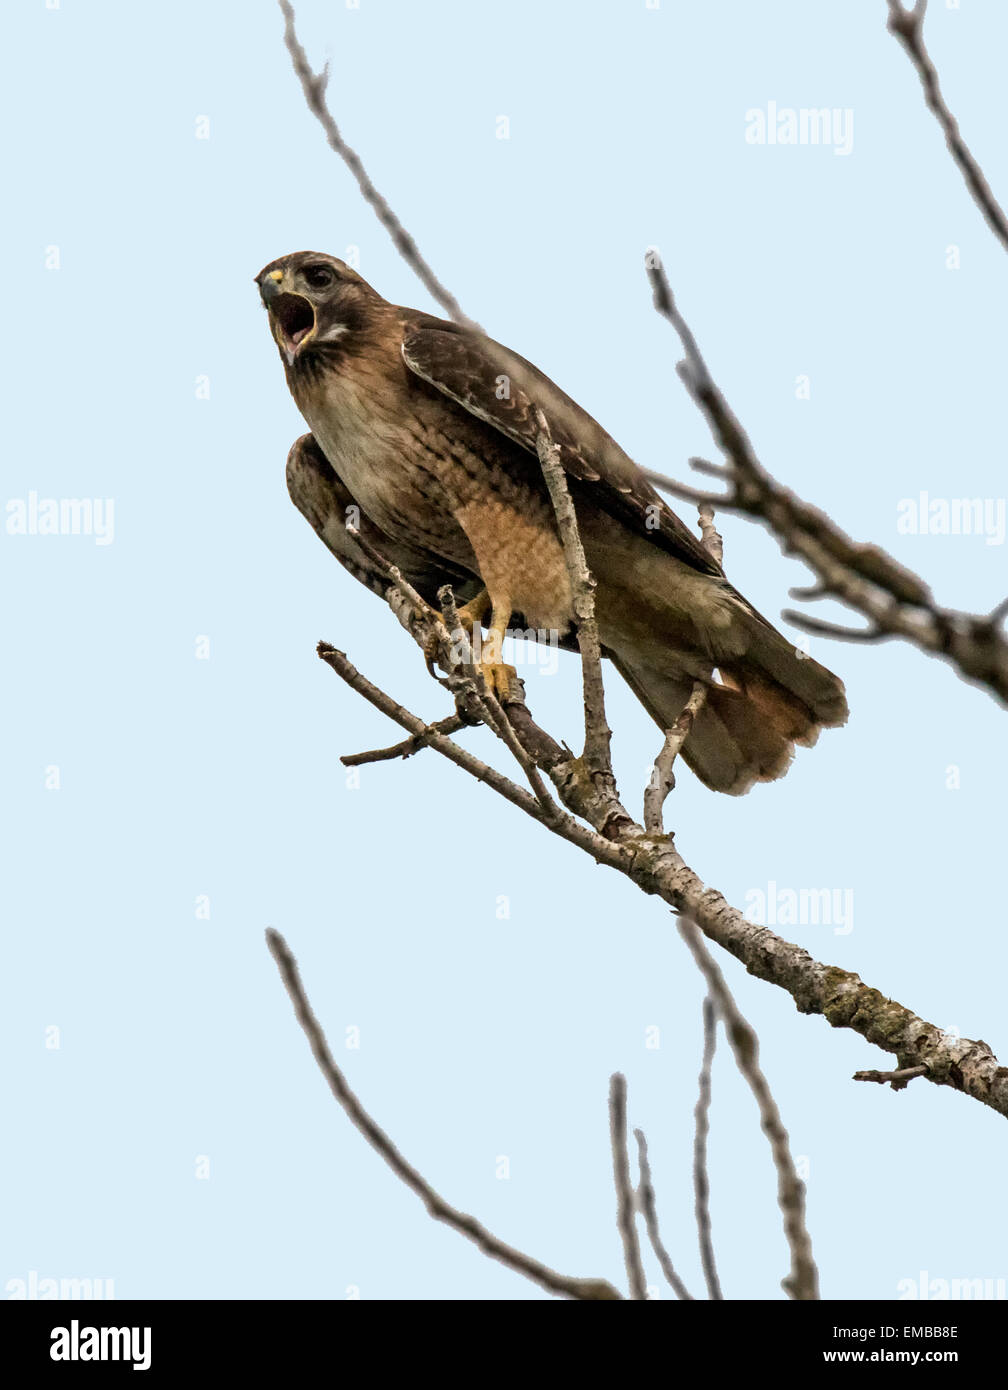 RED-TAILED HAWK ( Buteo jamaicensis) perched and calling out to another bird Stock Photo